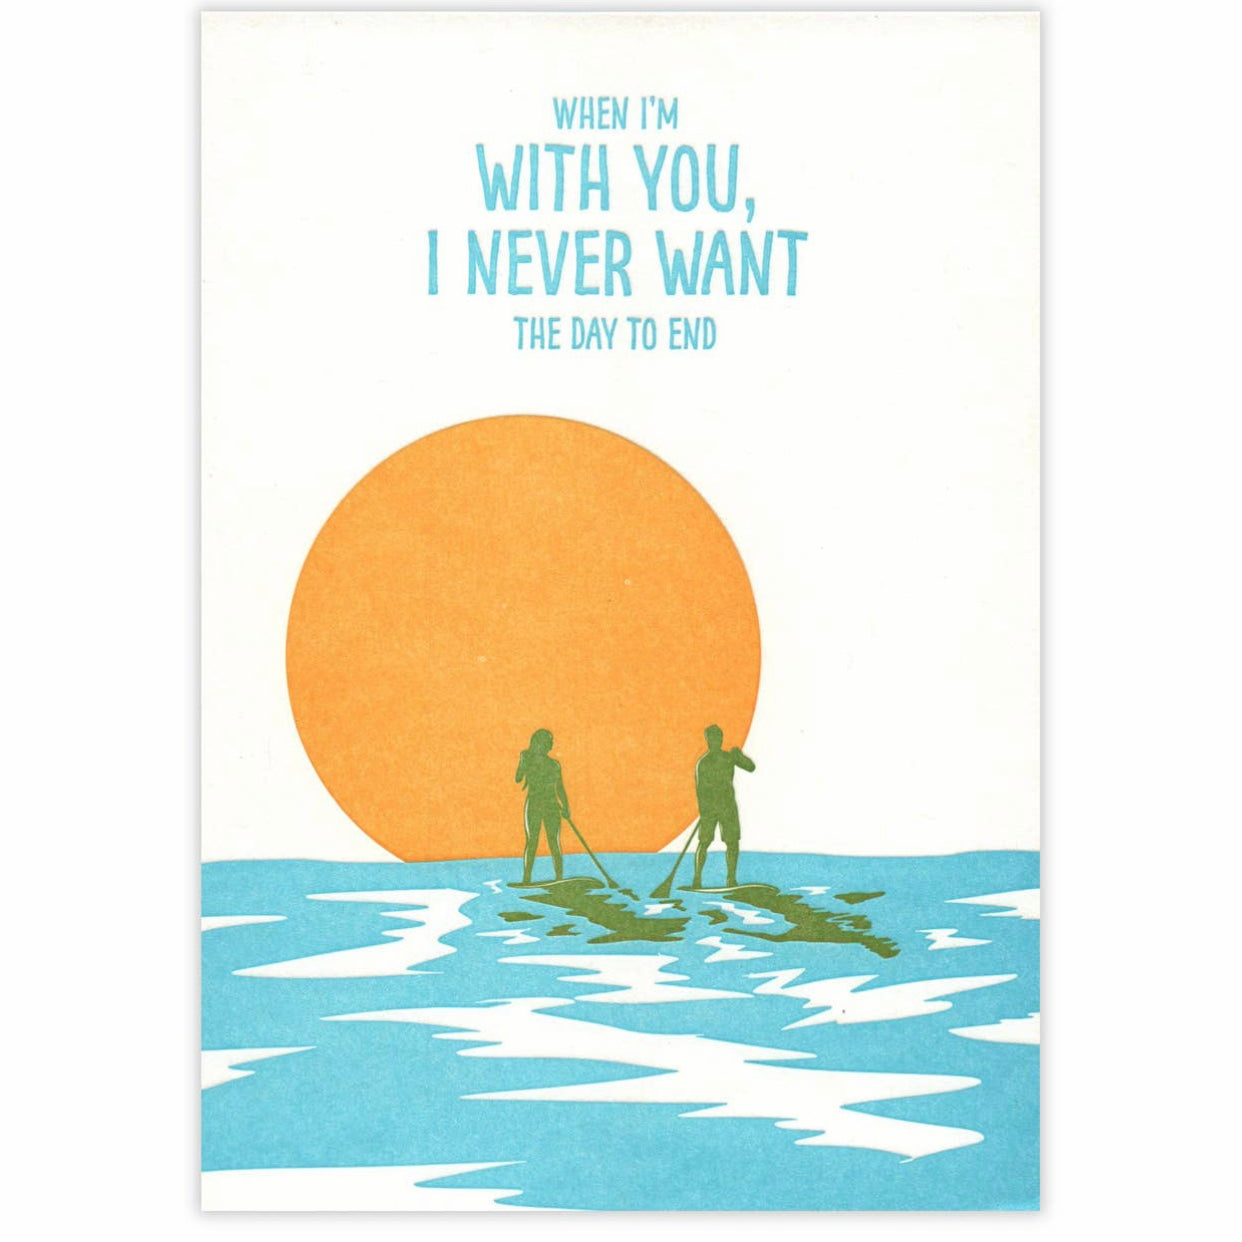 When I'm with you I never want the day to end greeting card